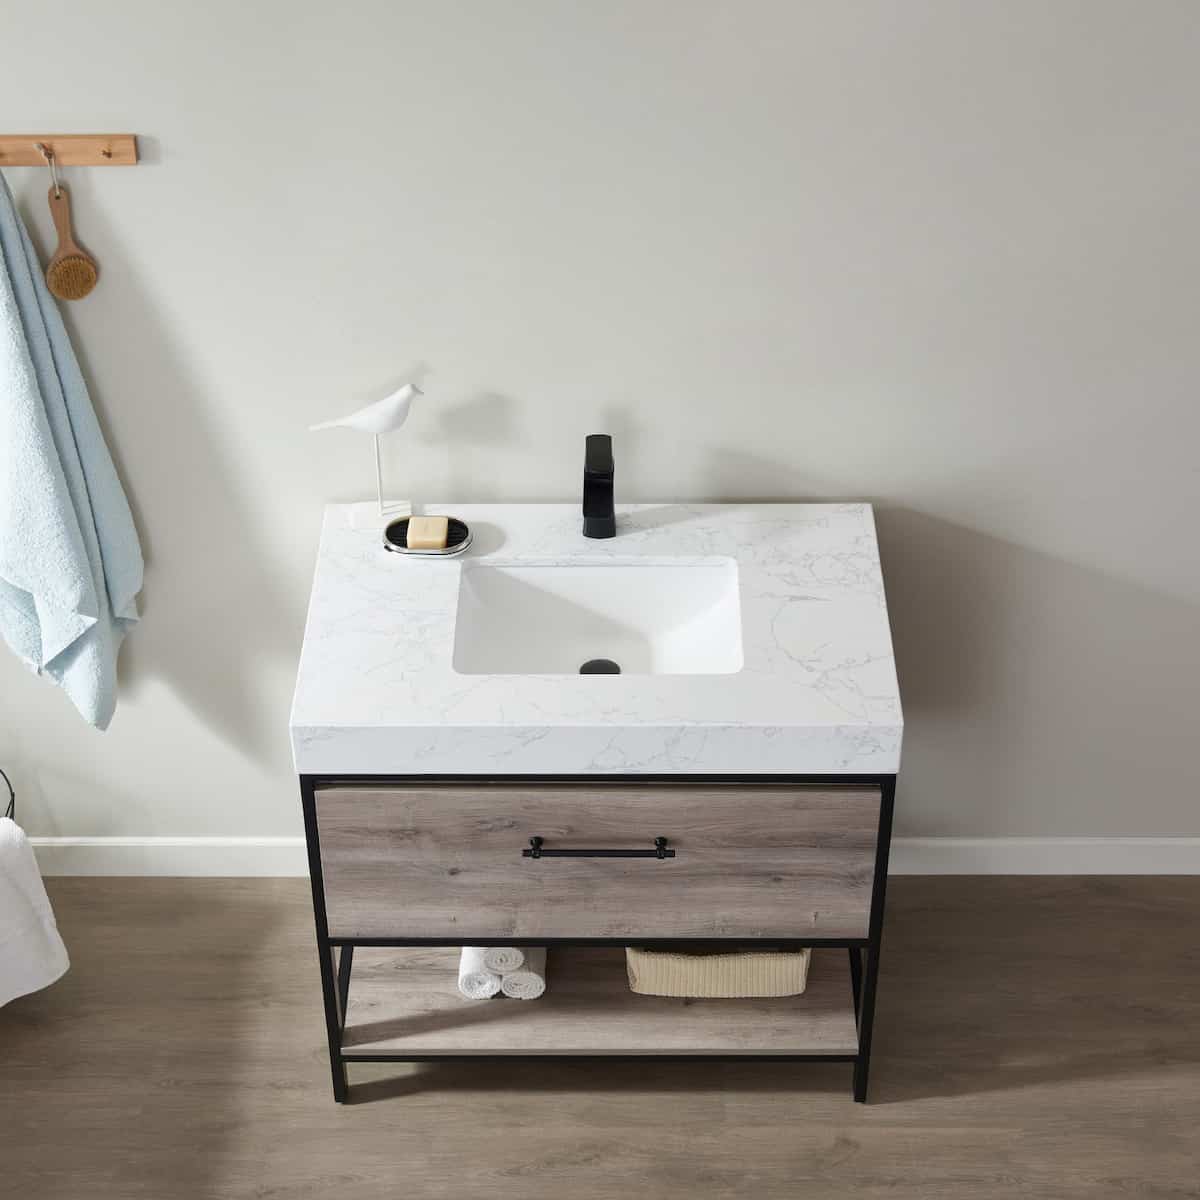 Vinnova Palma 36 Inch Freestanding Single Vanity In Mexican Oak with White Composite Grain Stone Countertop Without Mirror Sink 701236-MXO-GW-NM